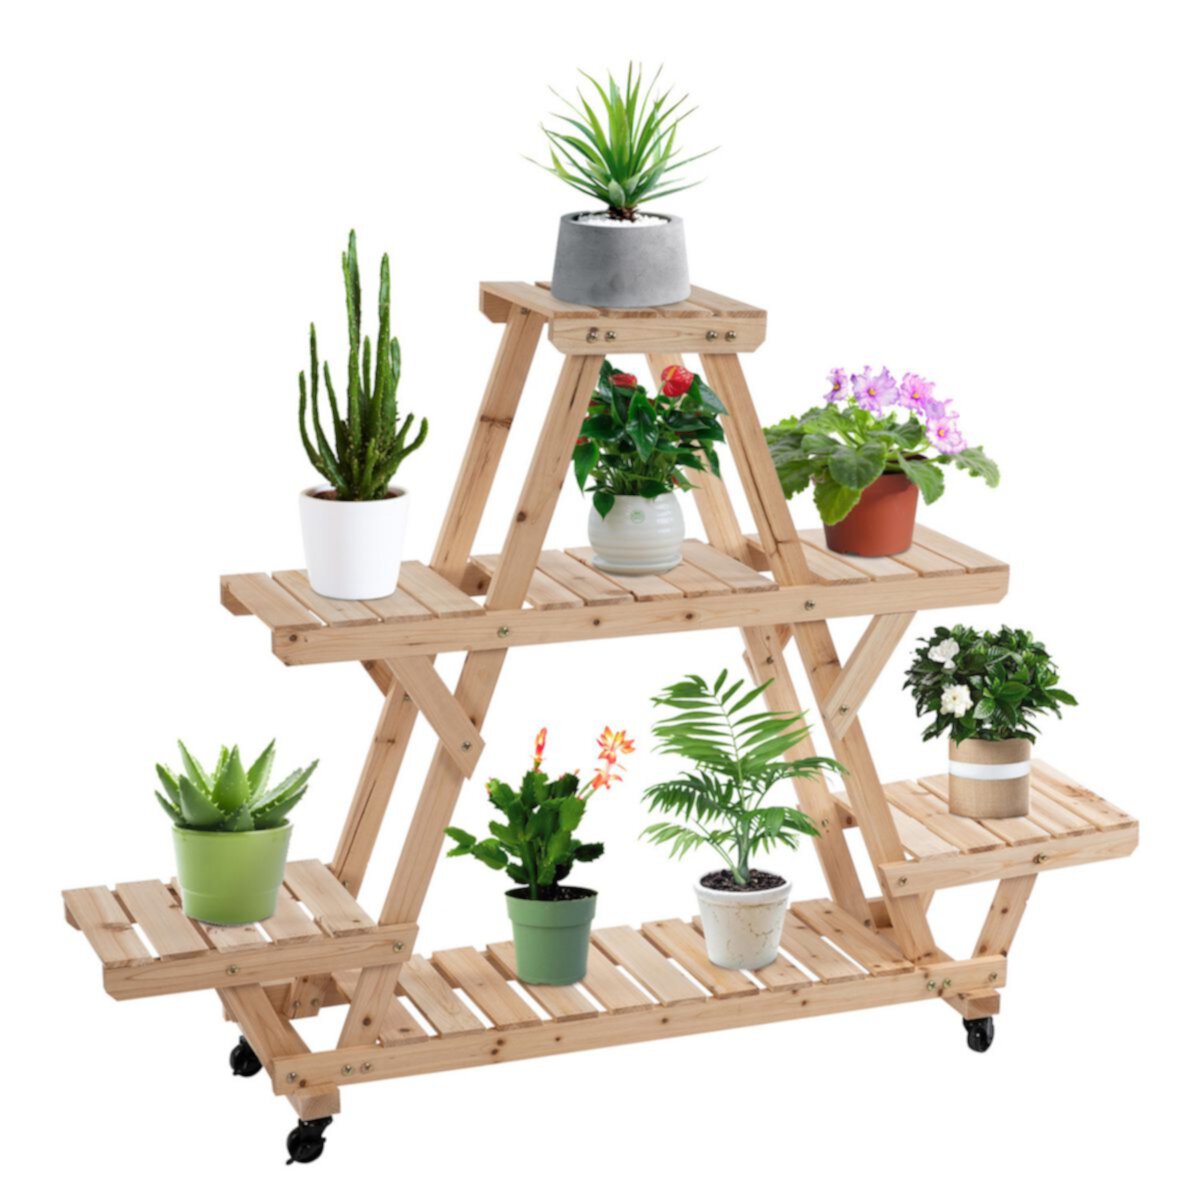 Outsunny Wood Plant Stand with 7 Tier Removable Wheels Brakes Outdoor/Indoor Plant Shelf with Large Capacity for Garden Balcony Backyard Natural Outsunny